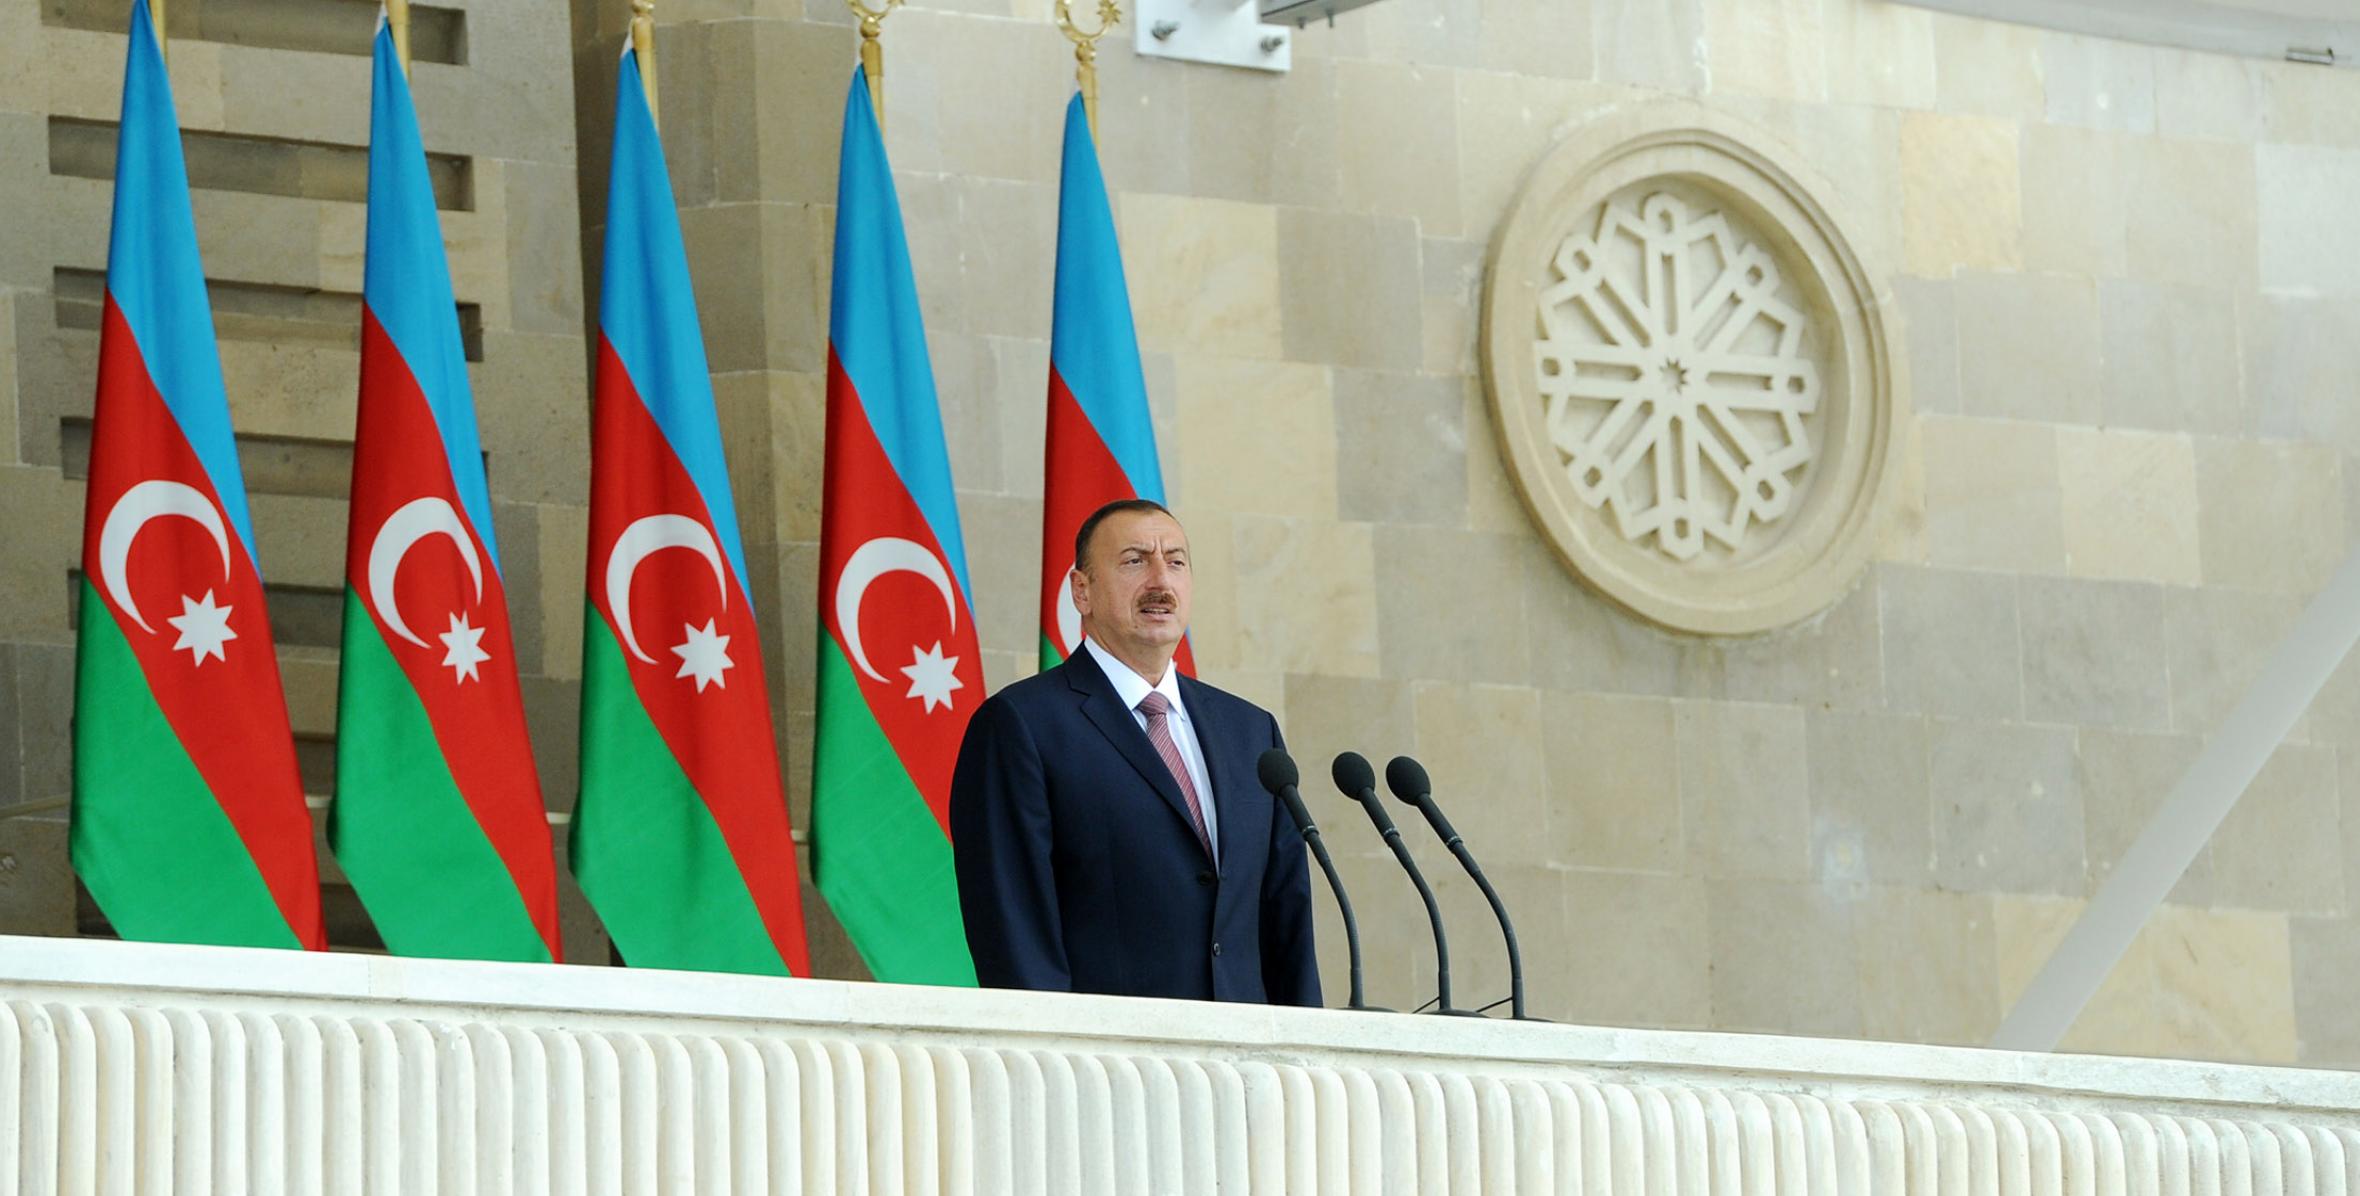 Speech by Ilham Aliyev at the official military parade on the occasion of the 95th anniversary of the Armed Forces